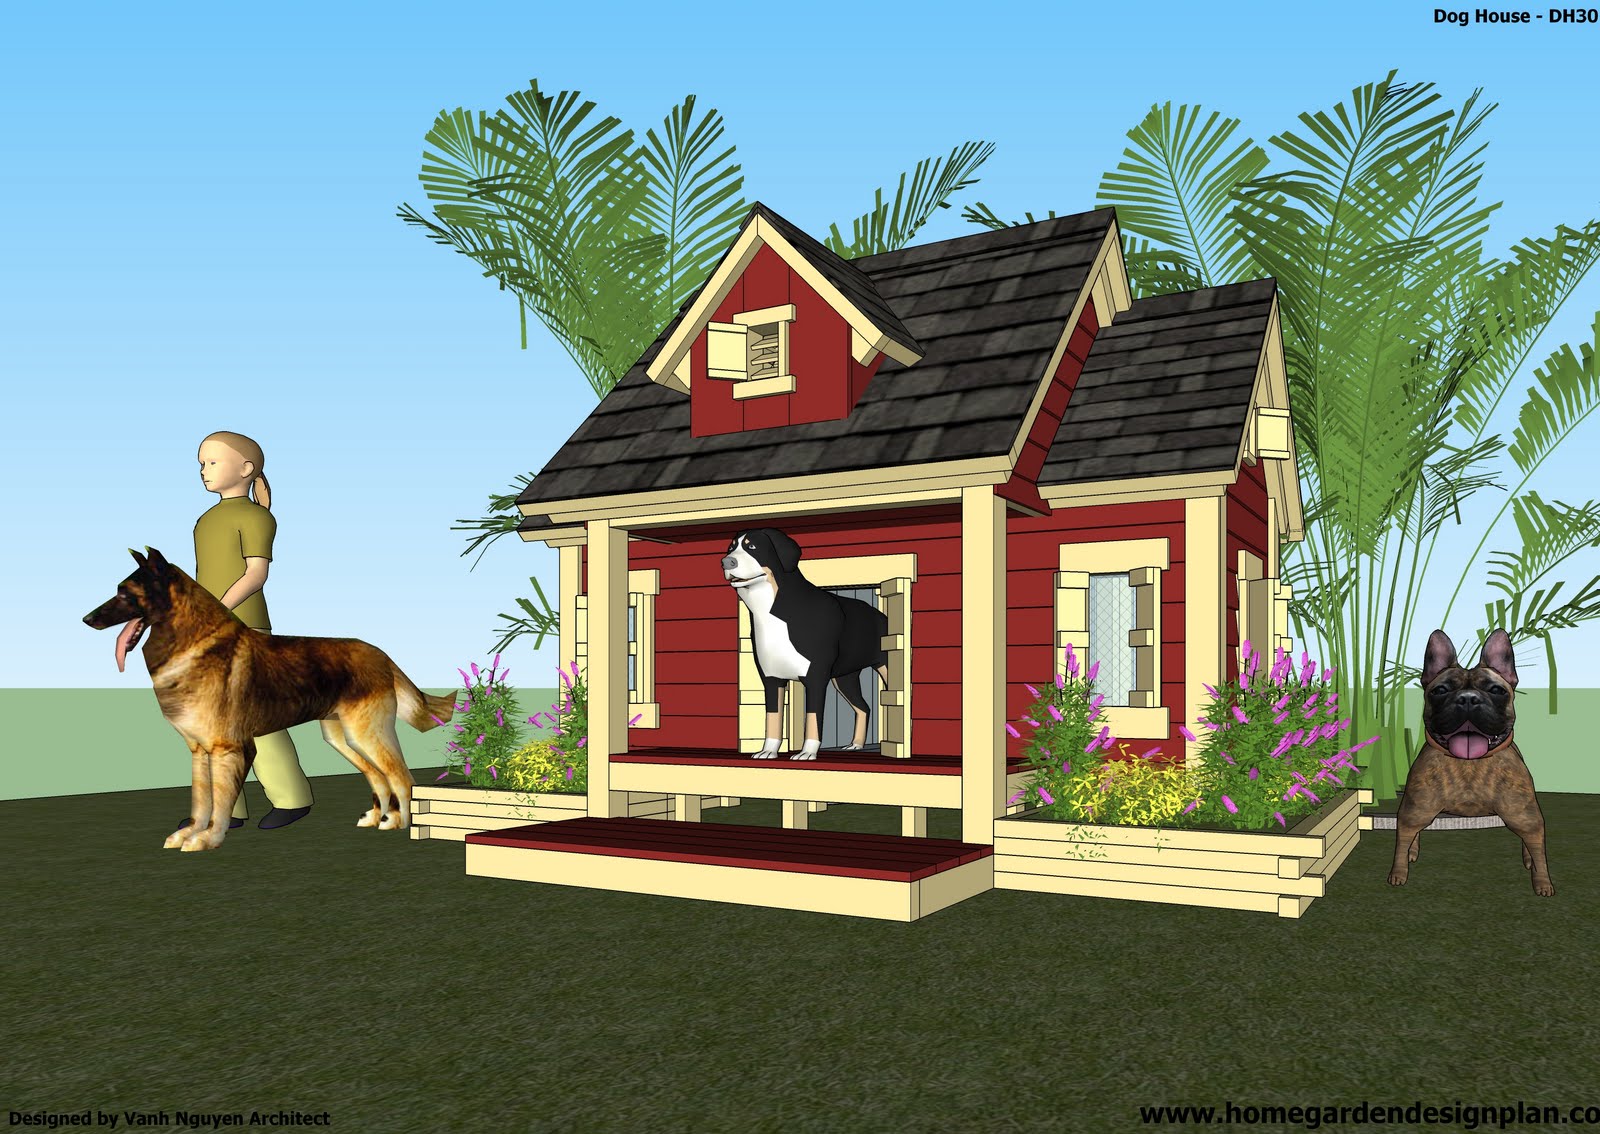  Dog House Plans - How to Build an Insulated Dog House - Free Dog House